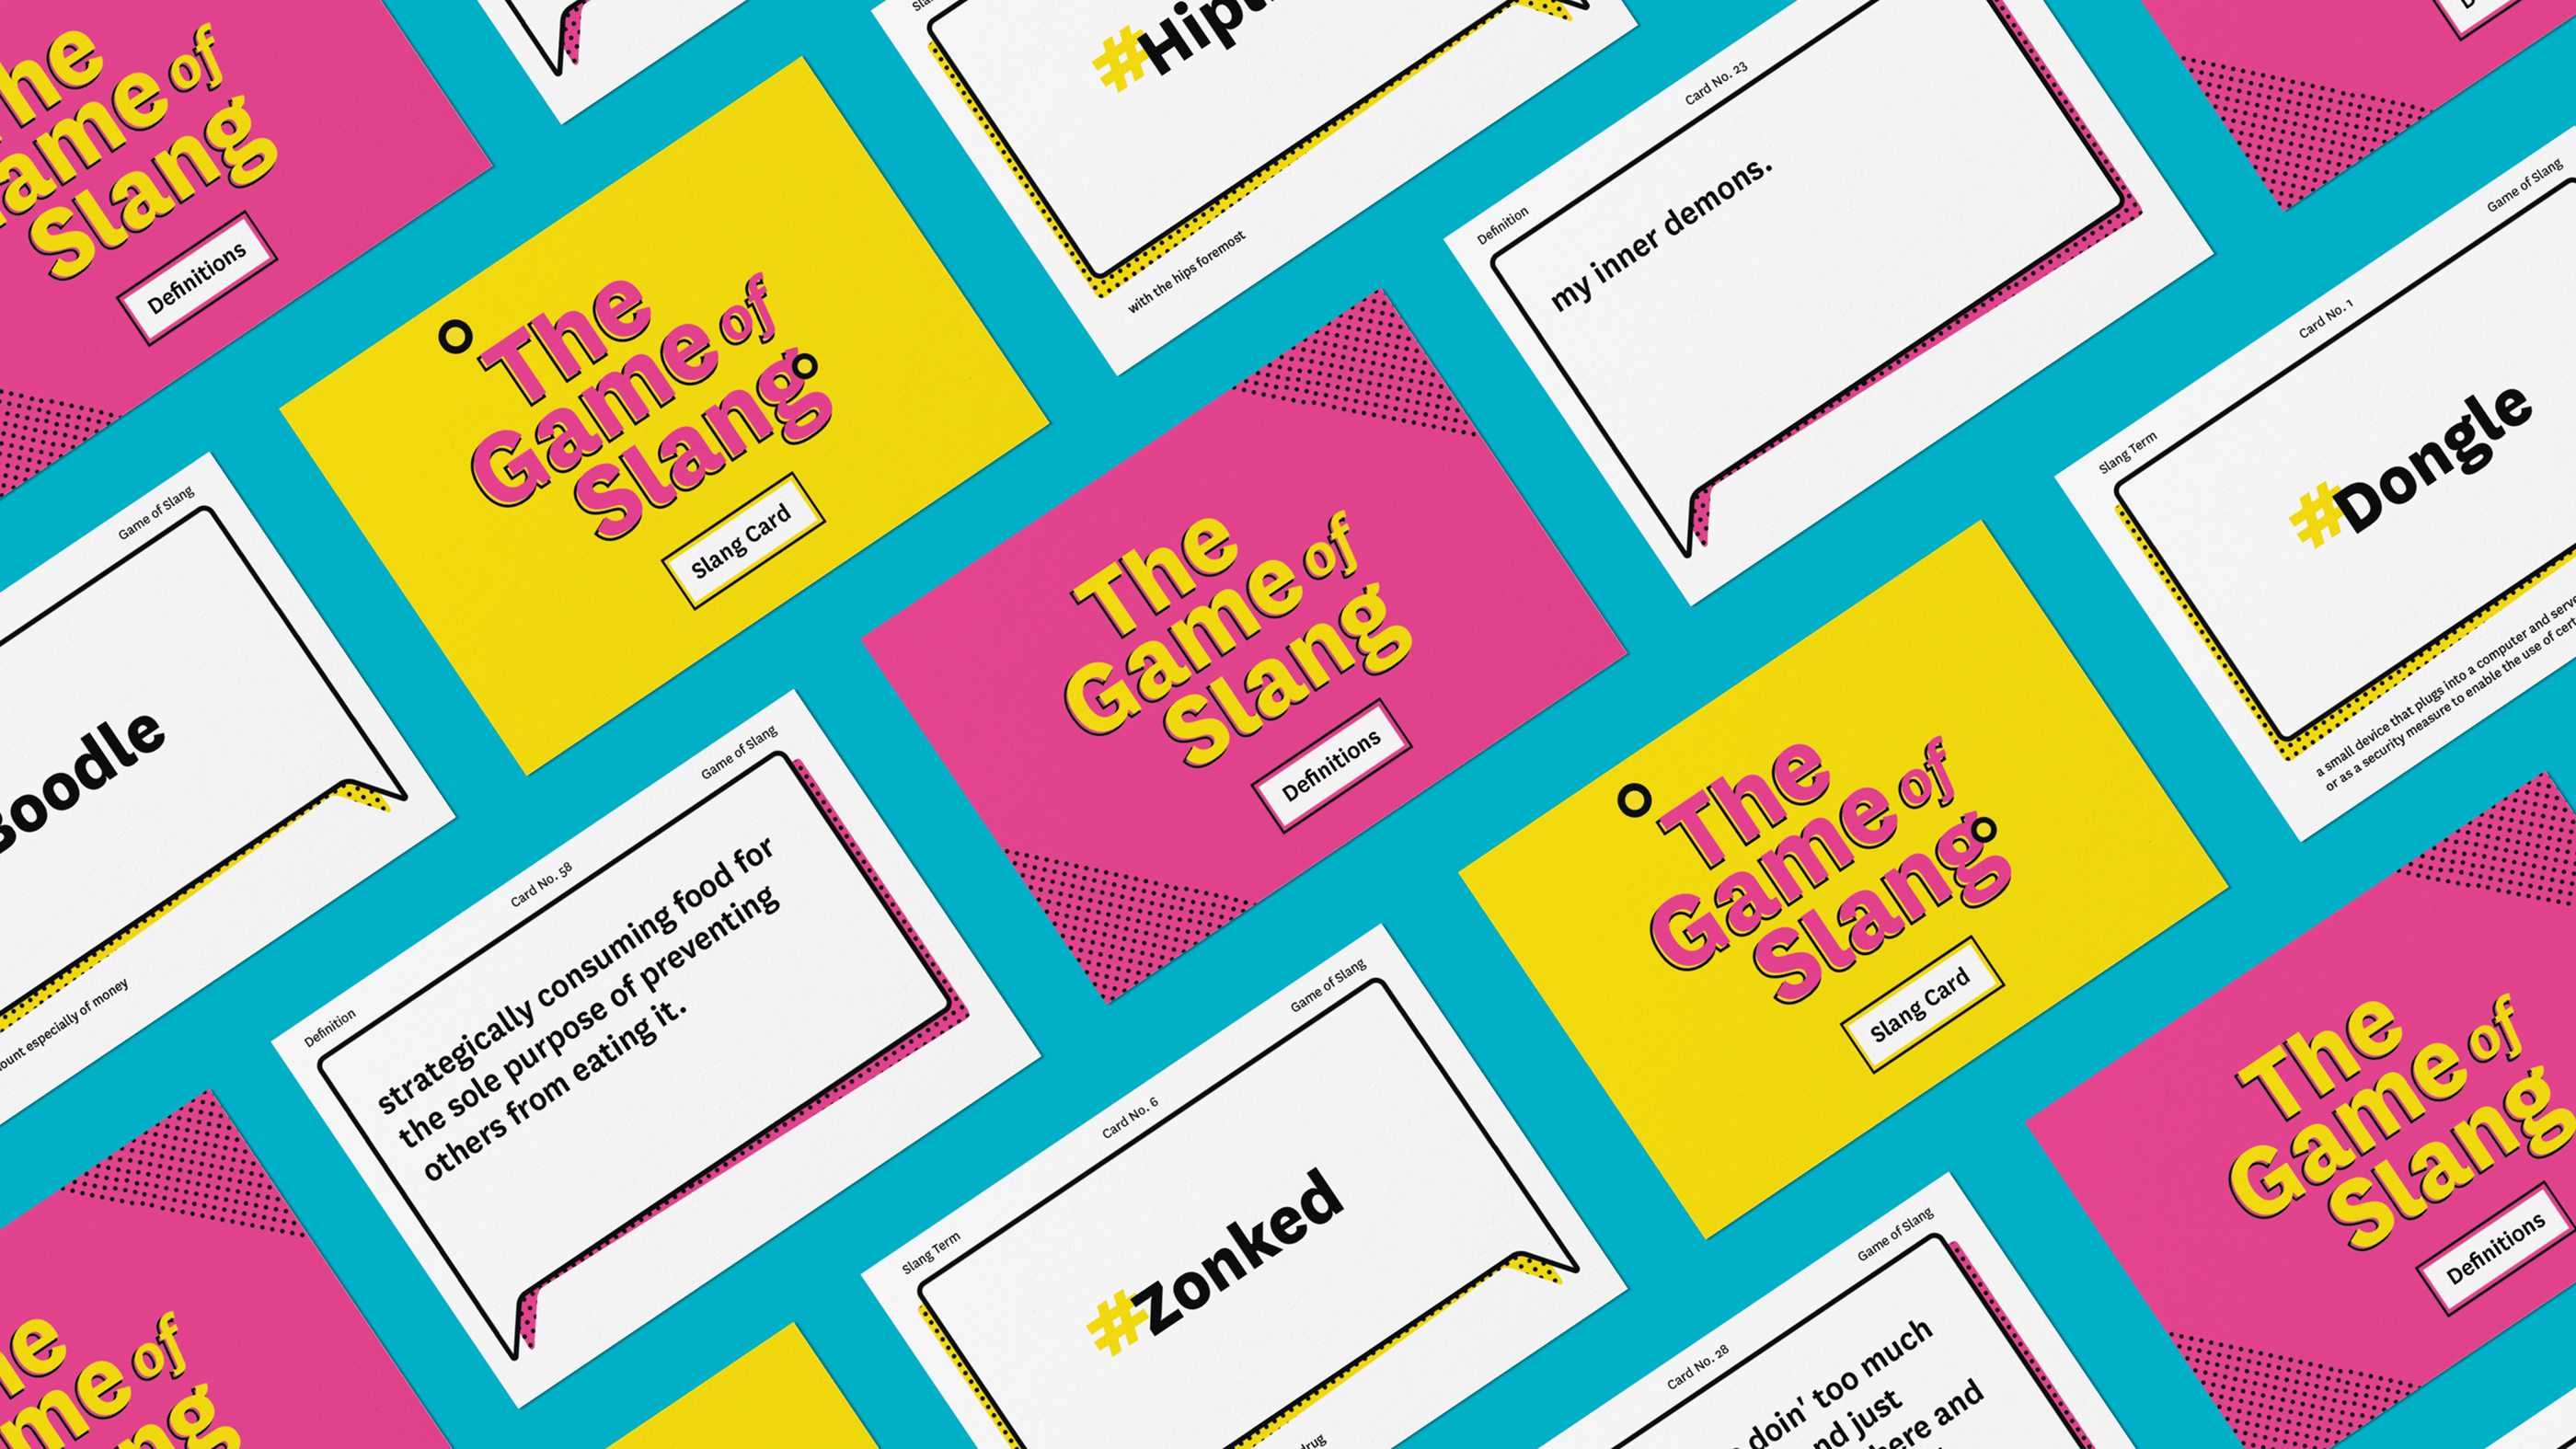 The Game of Slang on Behance